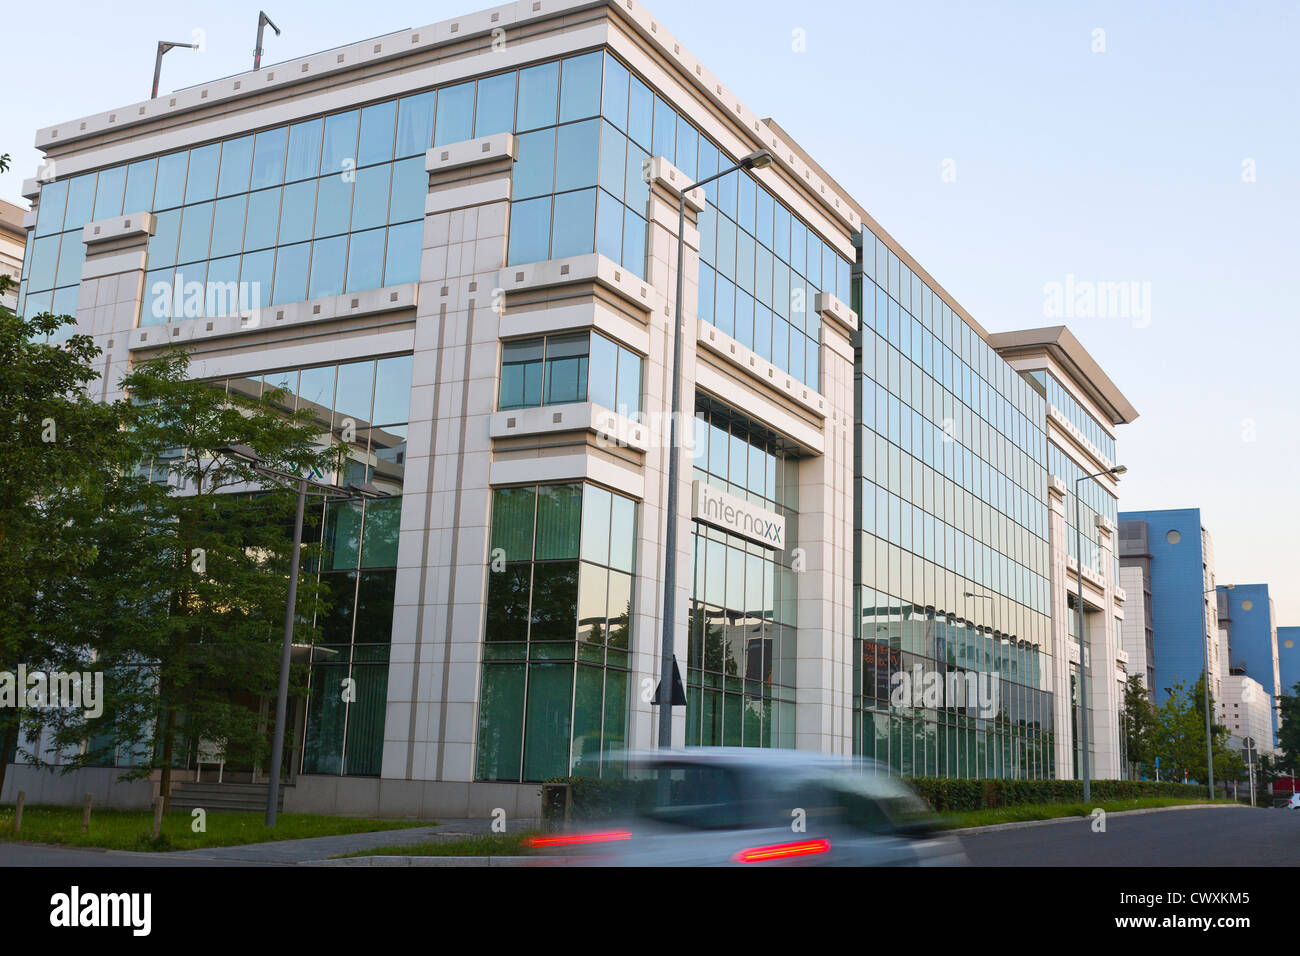 Luxembourg City - The building of Internet Broker and Bank Internaxx on  Kirchberg Stock Photo - Alamy